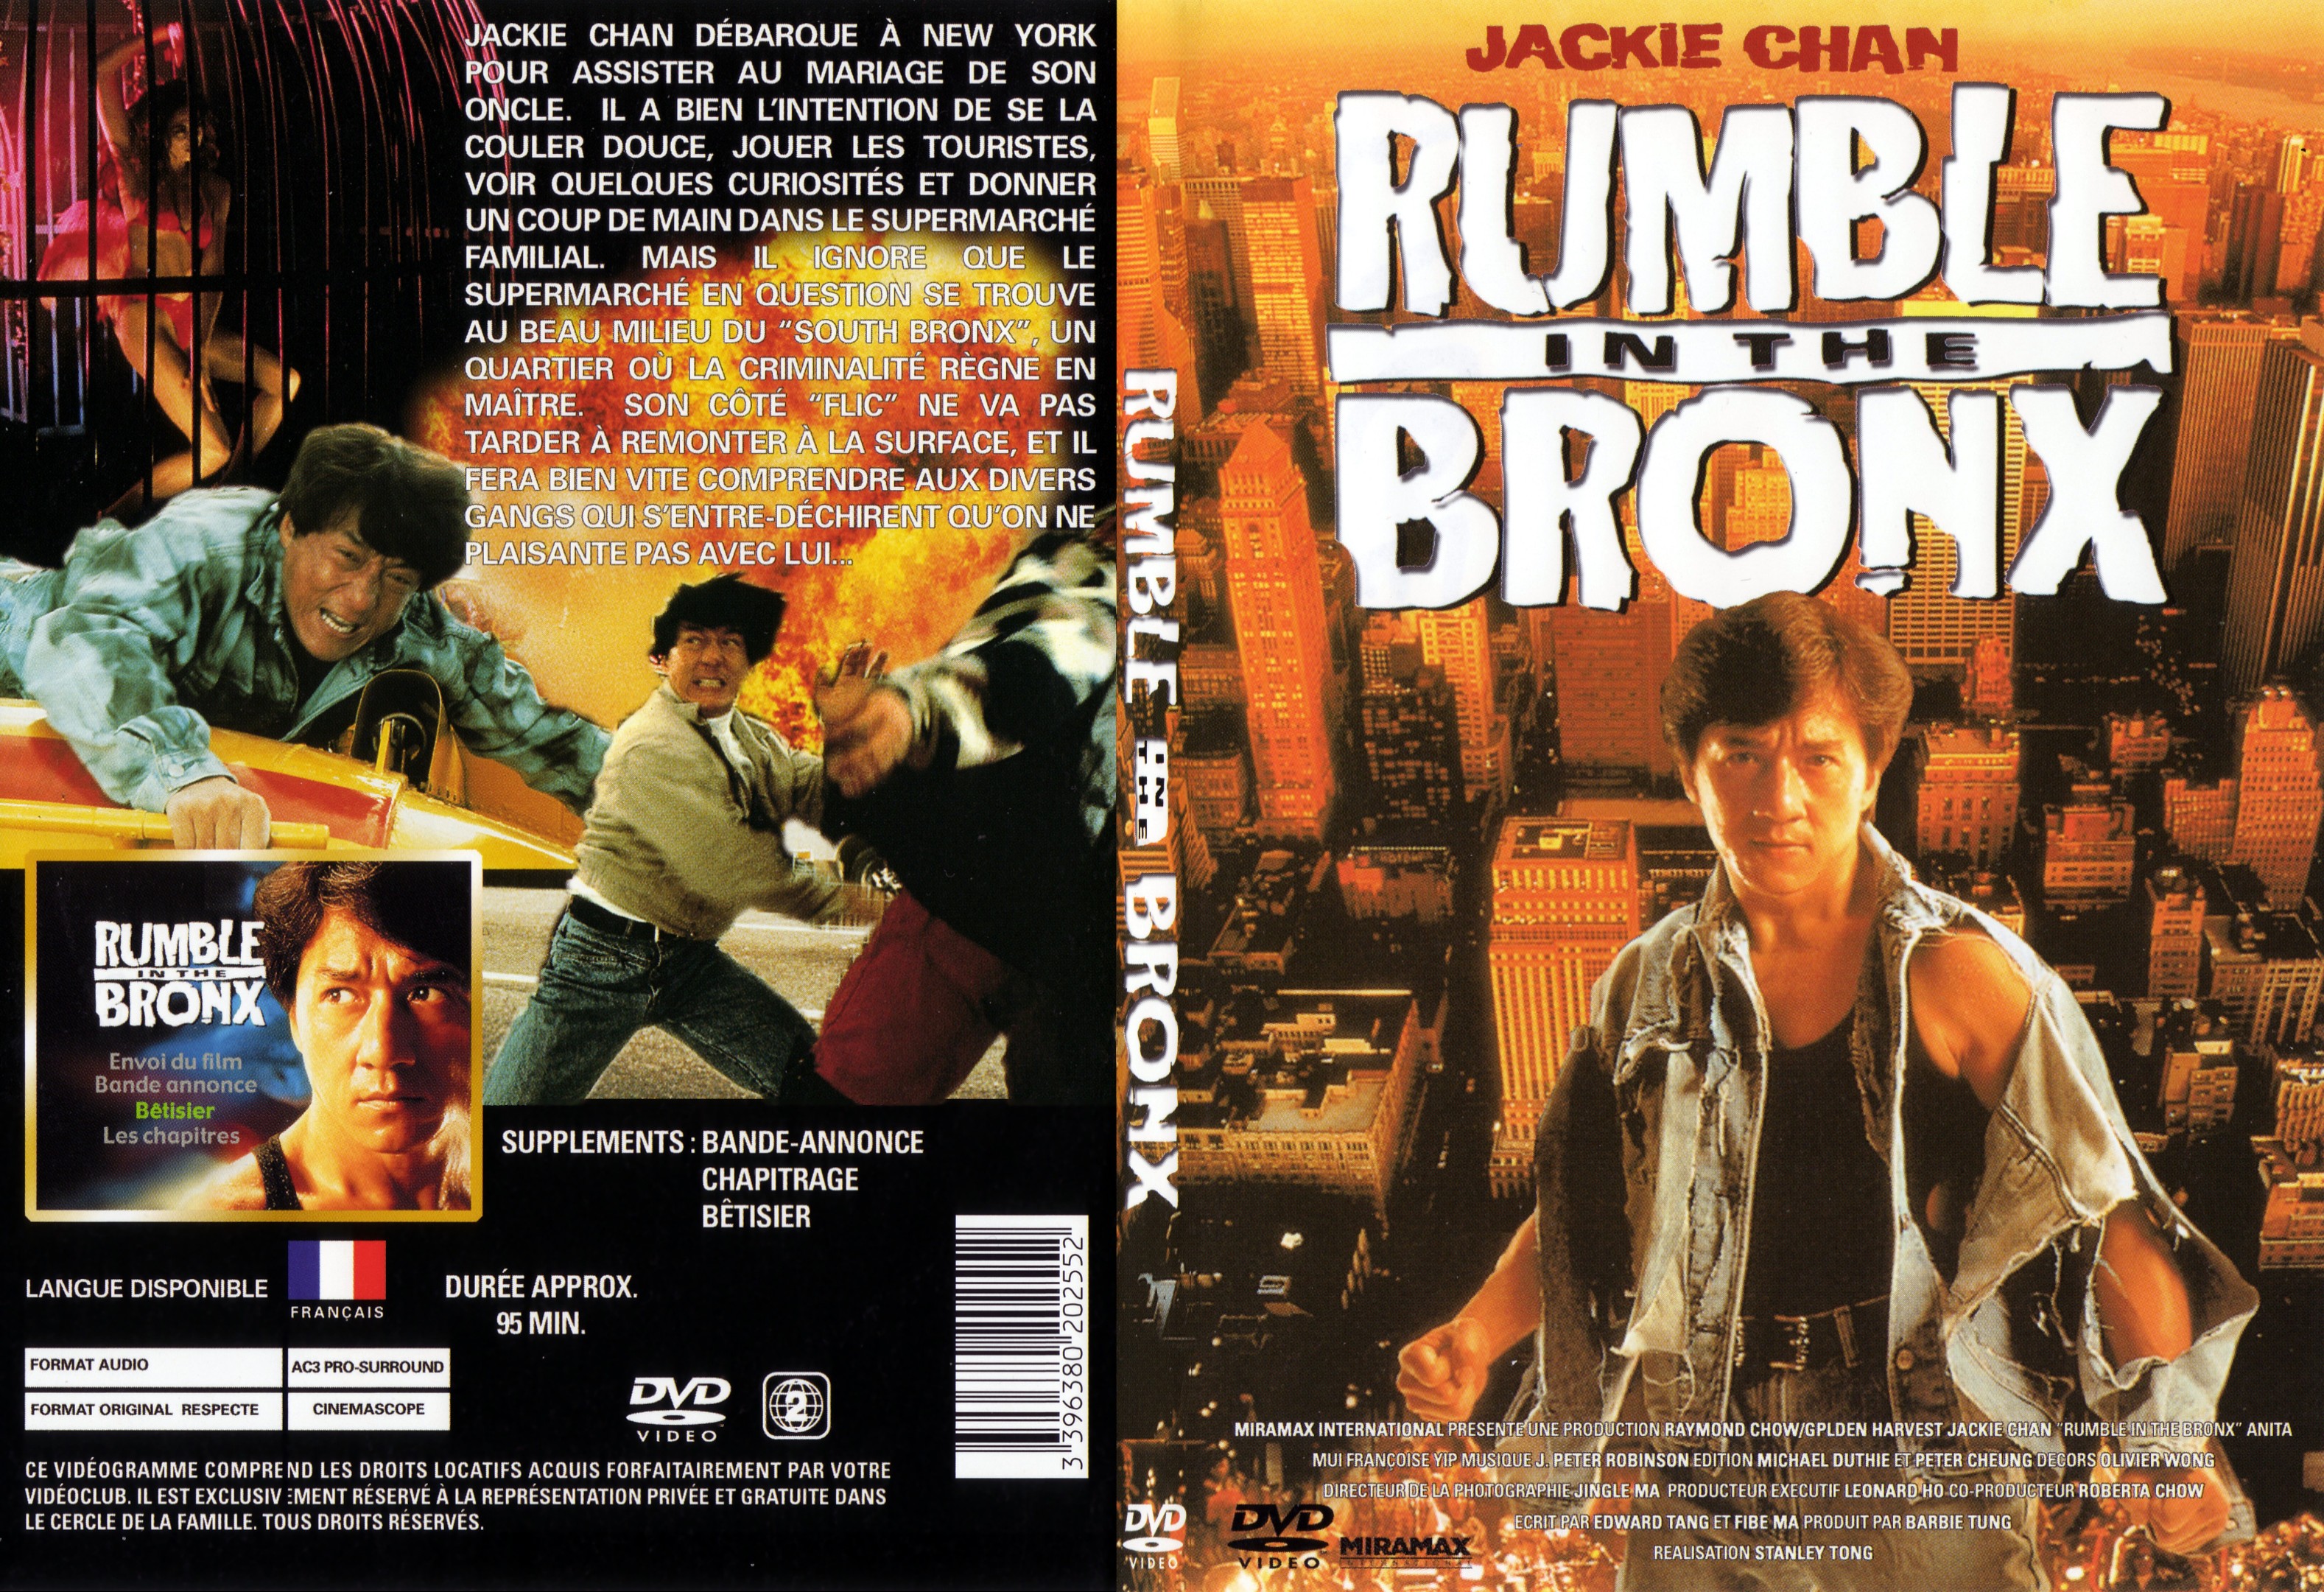 Jaquette DVD Rumble in the bronx - SLIM